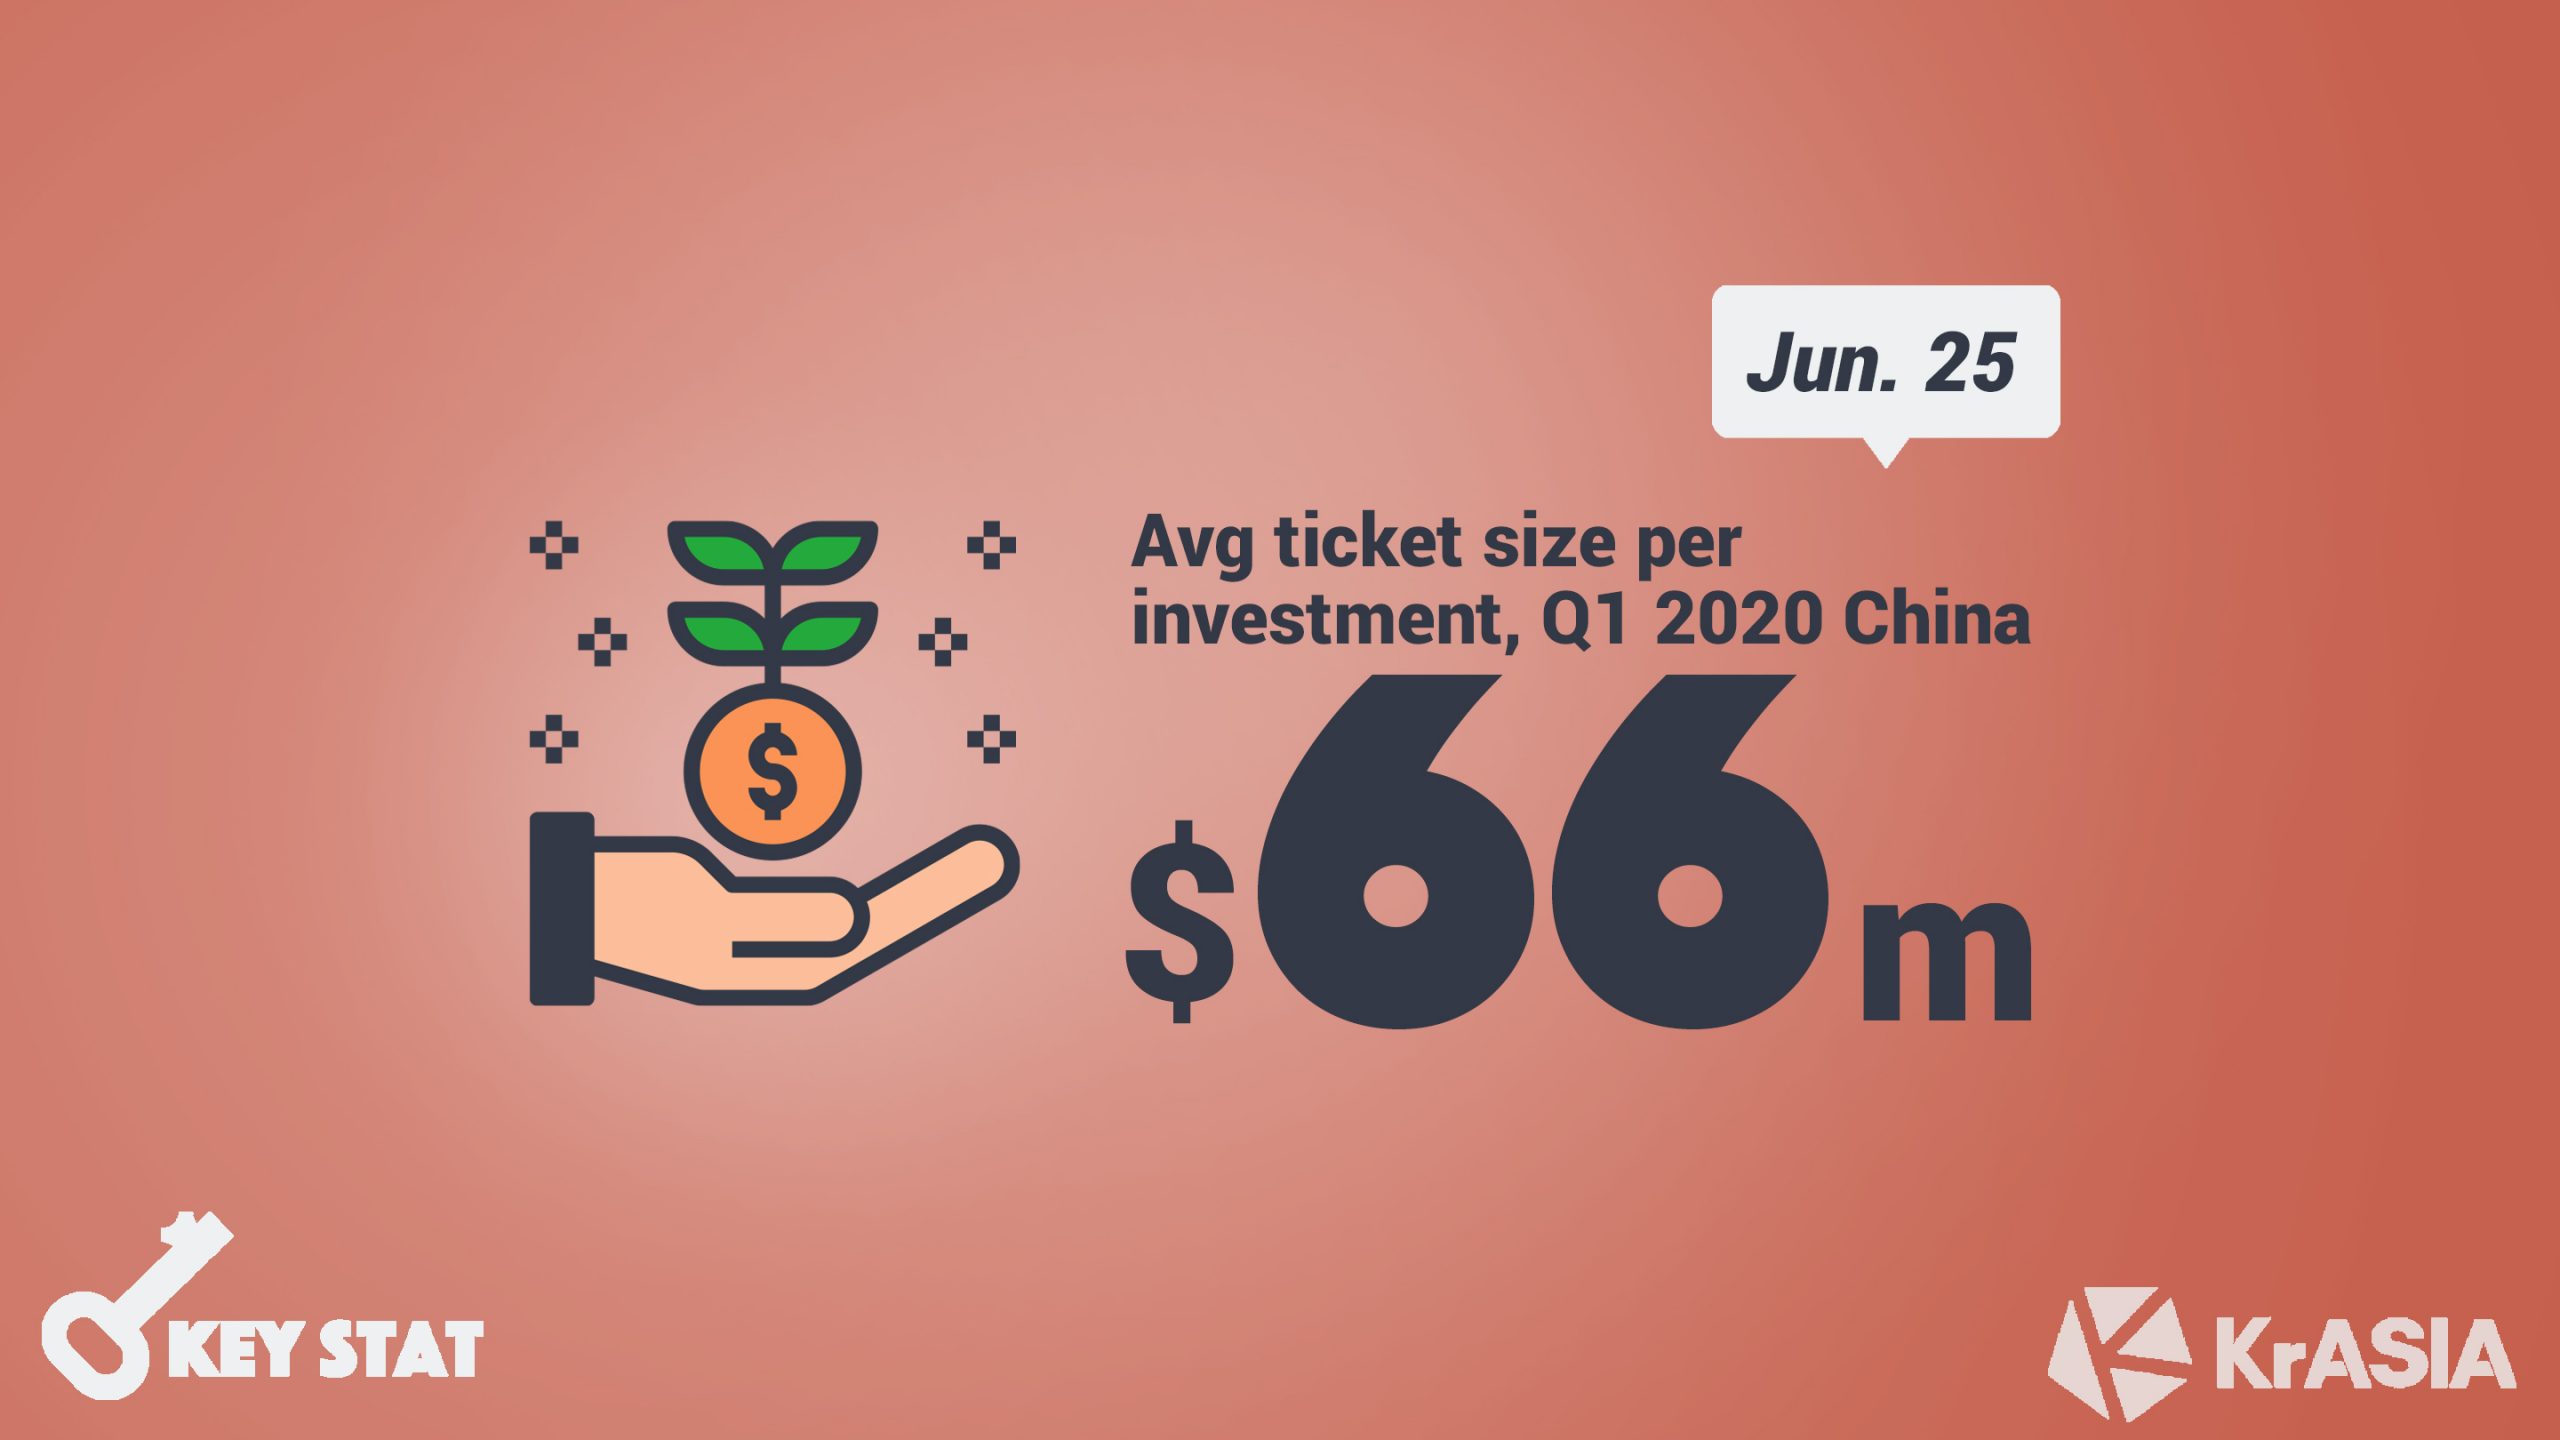 KEY STAT | China first quarter equity investment rebounds due to biggest average ticket size in five years